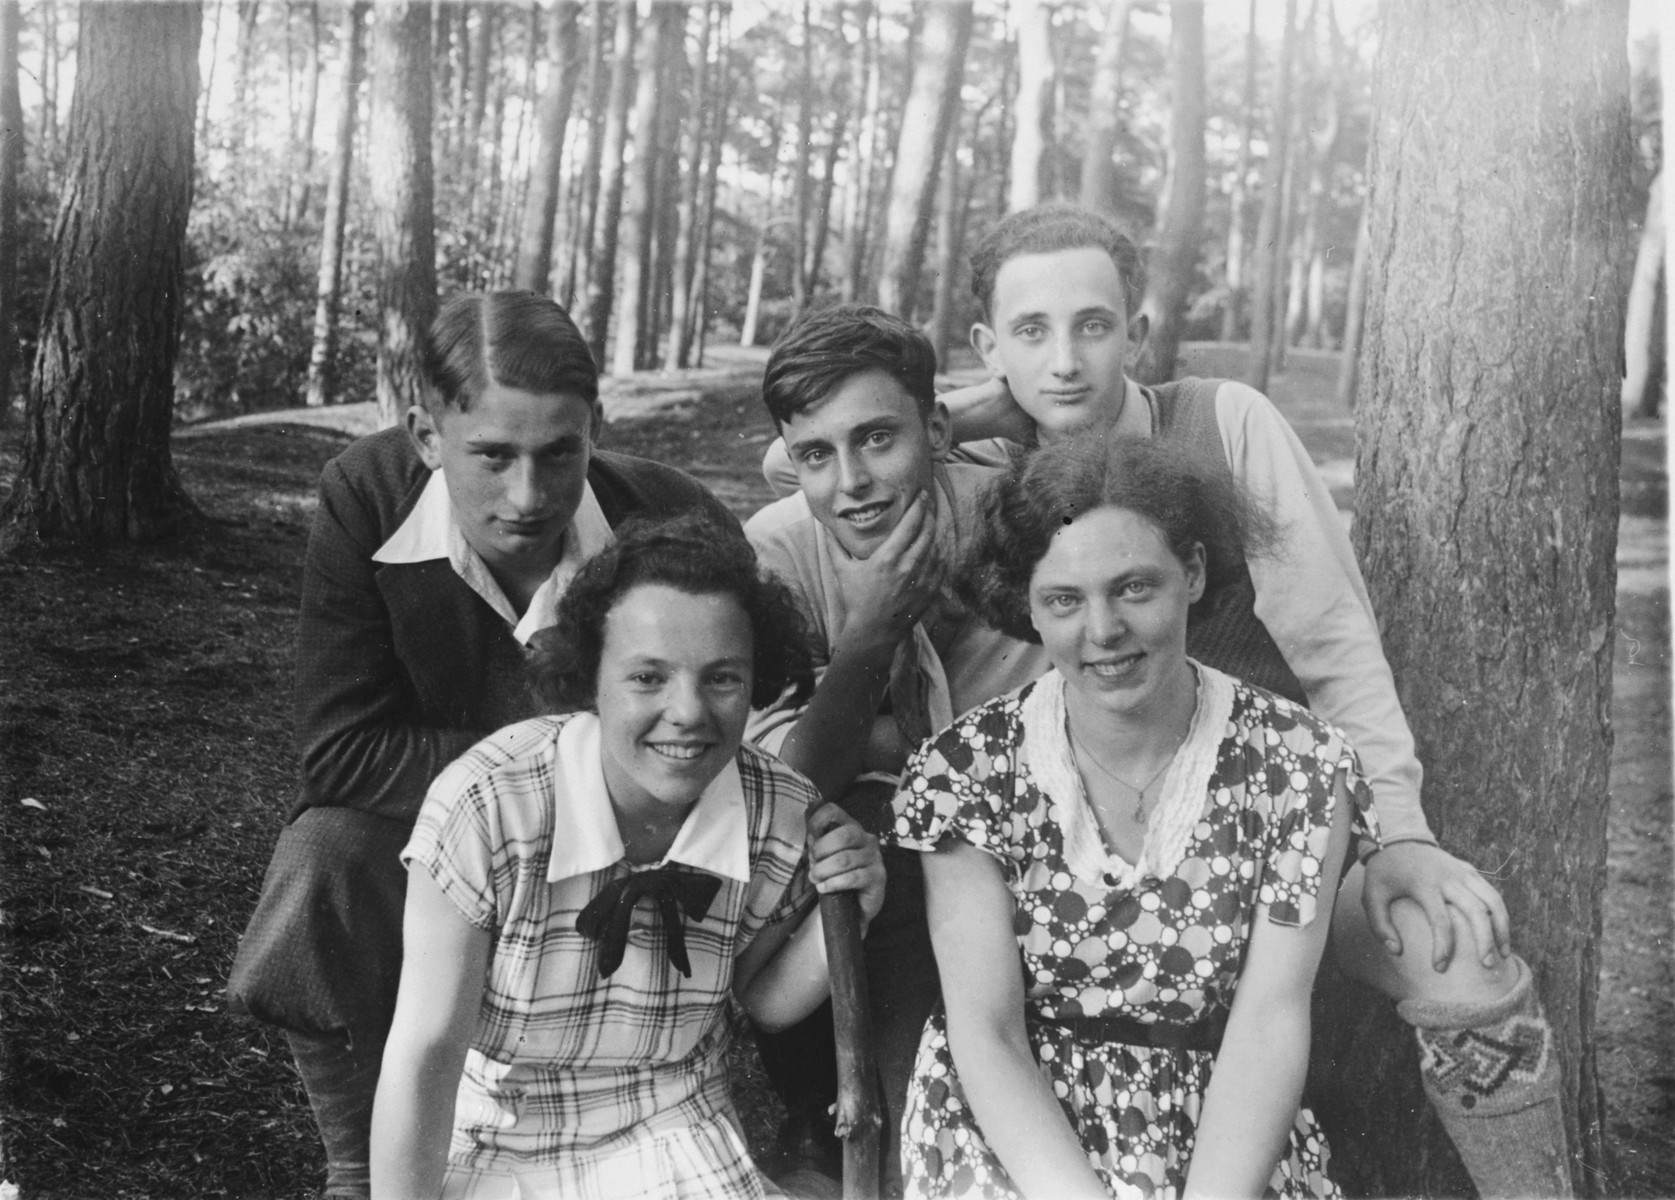 Group portrait of four Zionist youth.

Letty Rudelsheim is pictured on the bottom left.